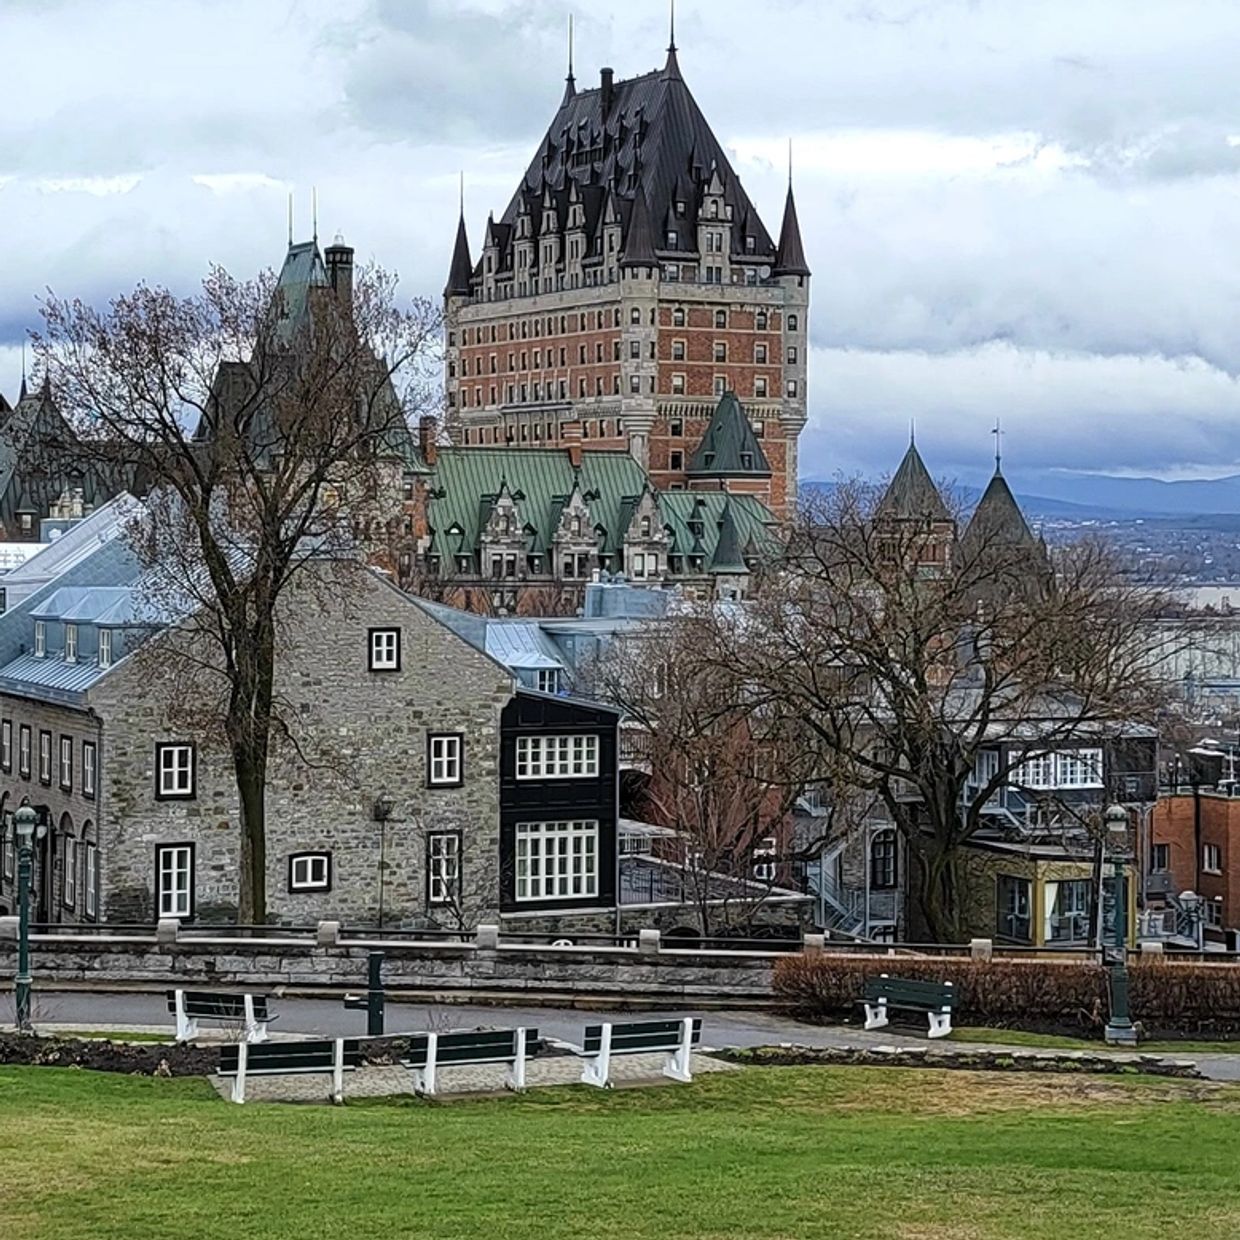 Aside view of the Chateau Frontenac